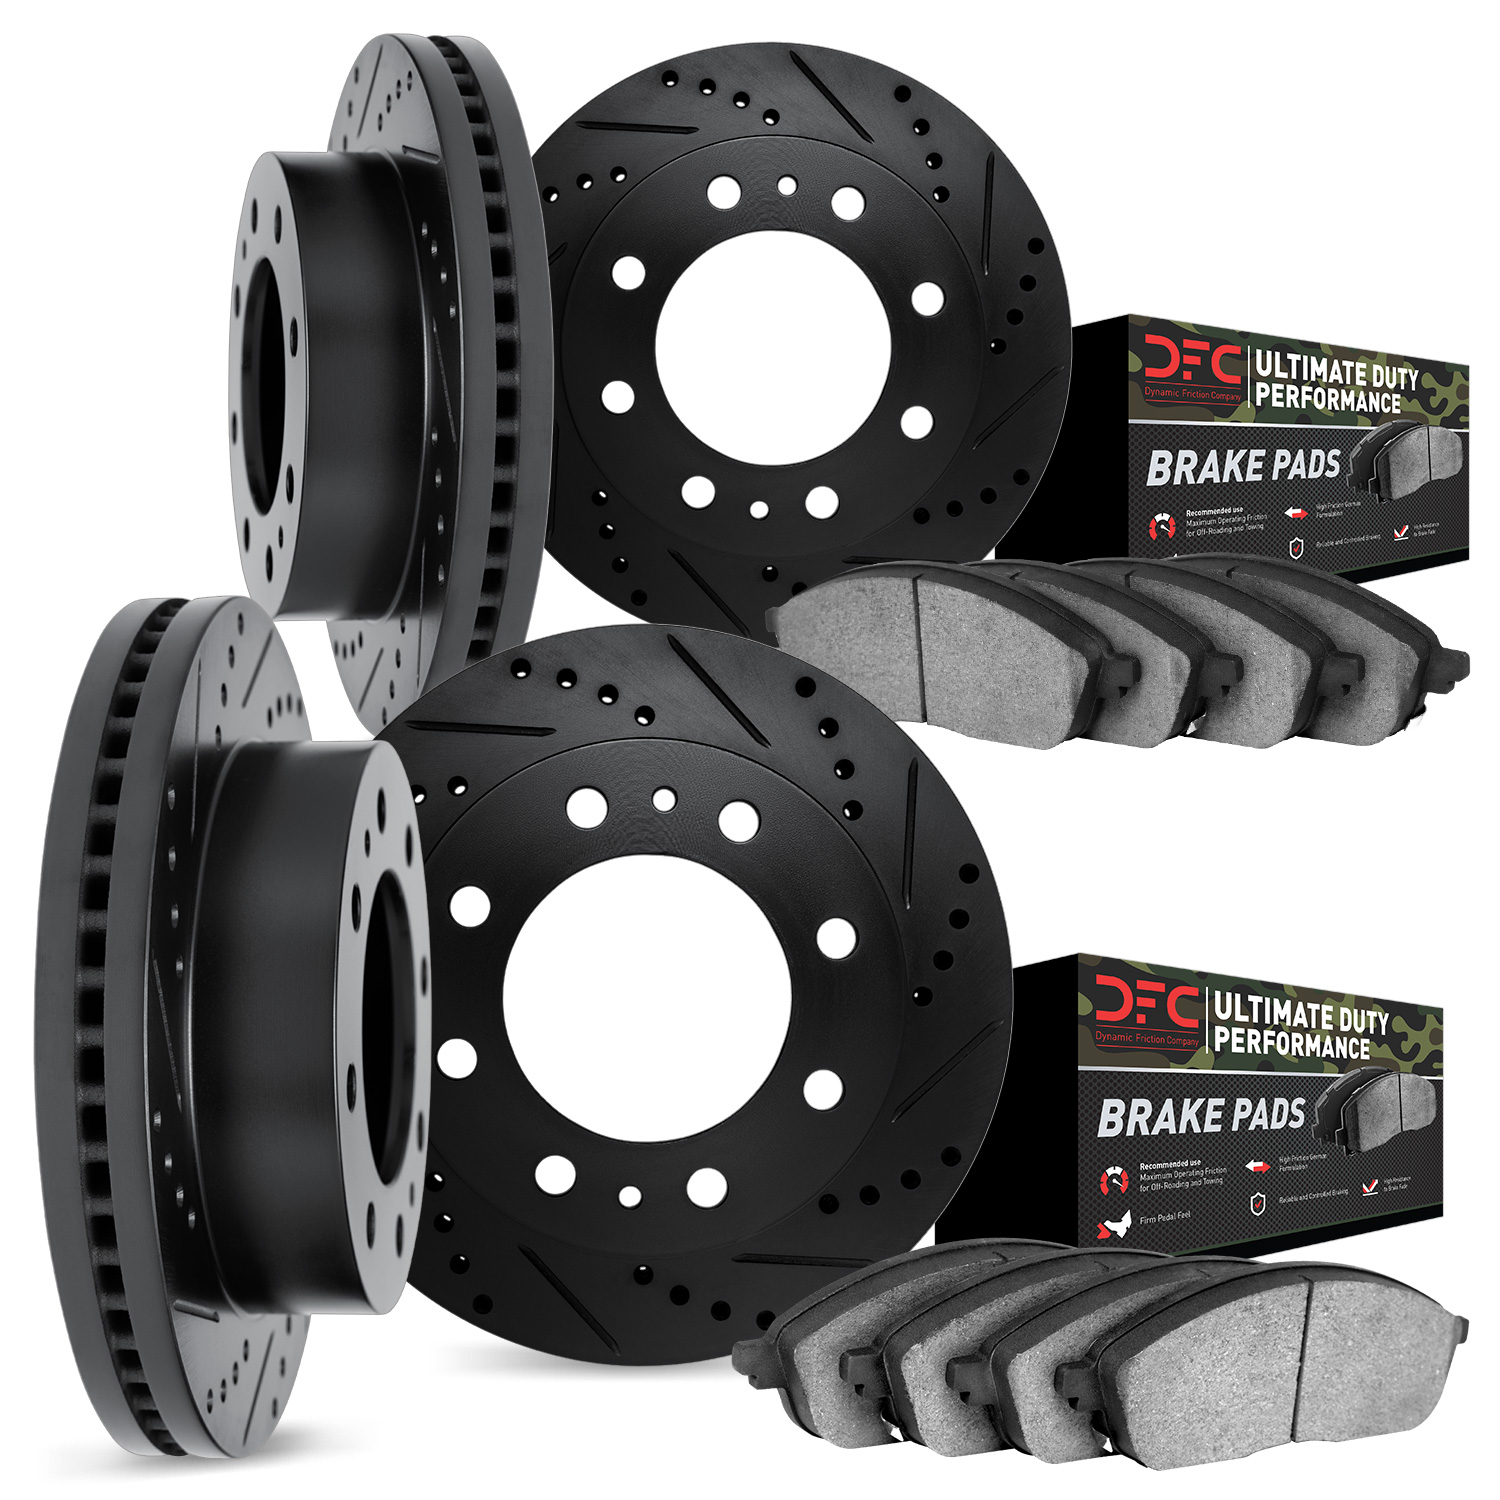 8404-48013 Drilled/Slotted Brake Rotors with Ultimate-Duty Brake Pads Kit [Black], 2001-2010 GM, Position: Front and Rear